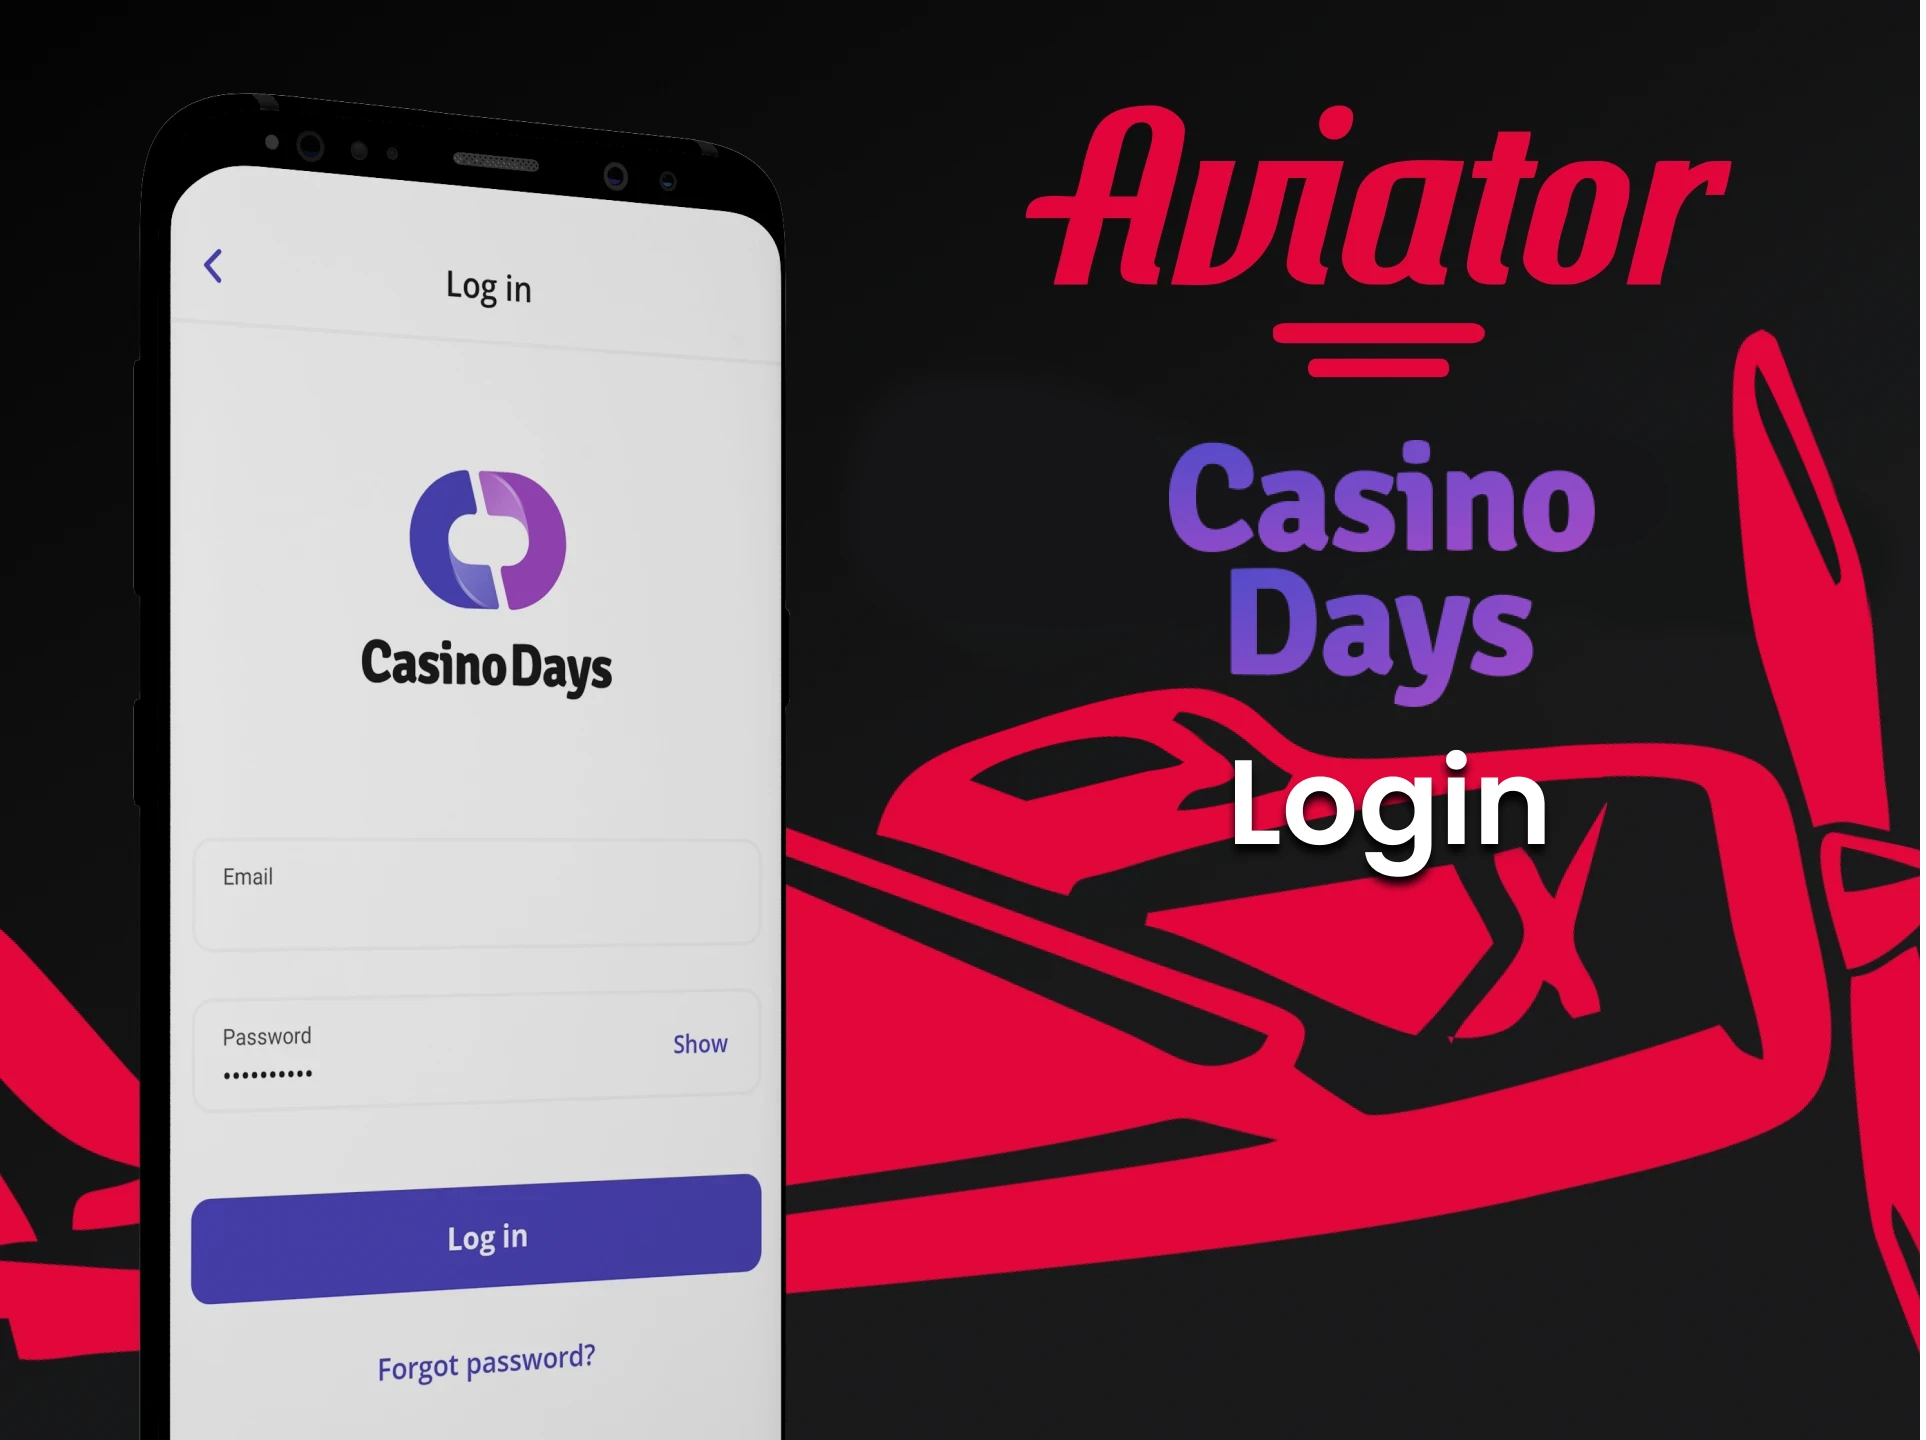 Log in to your personal Casino Days app account to play Aviator.